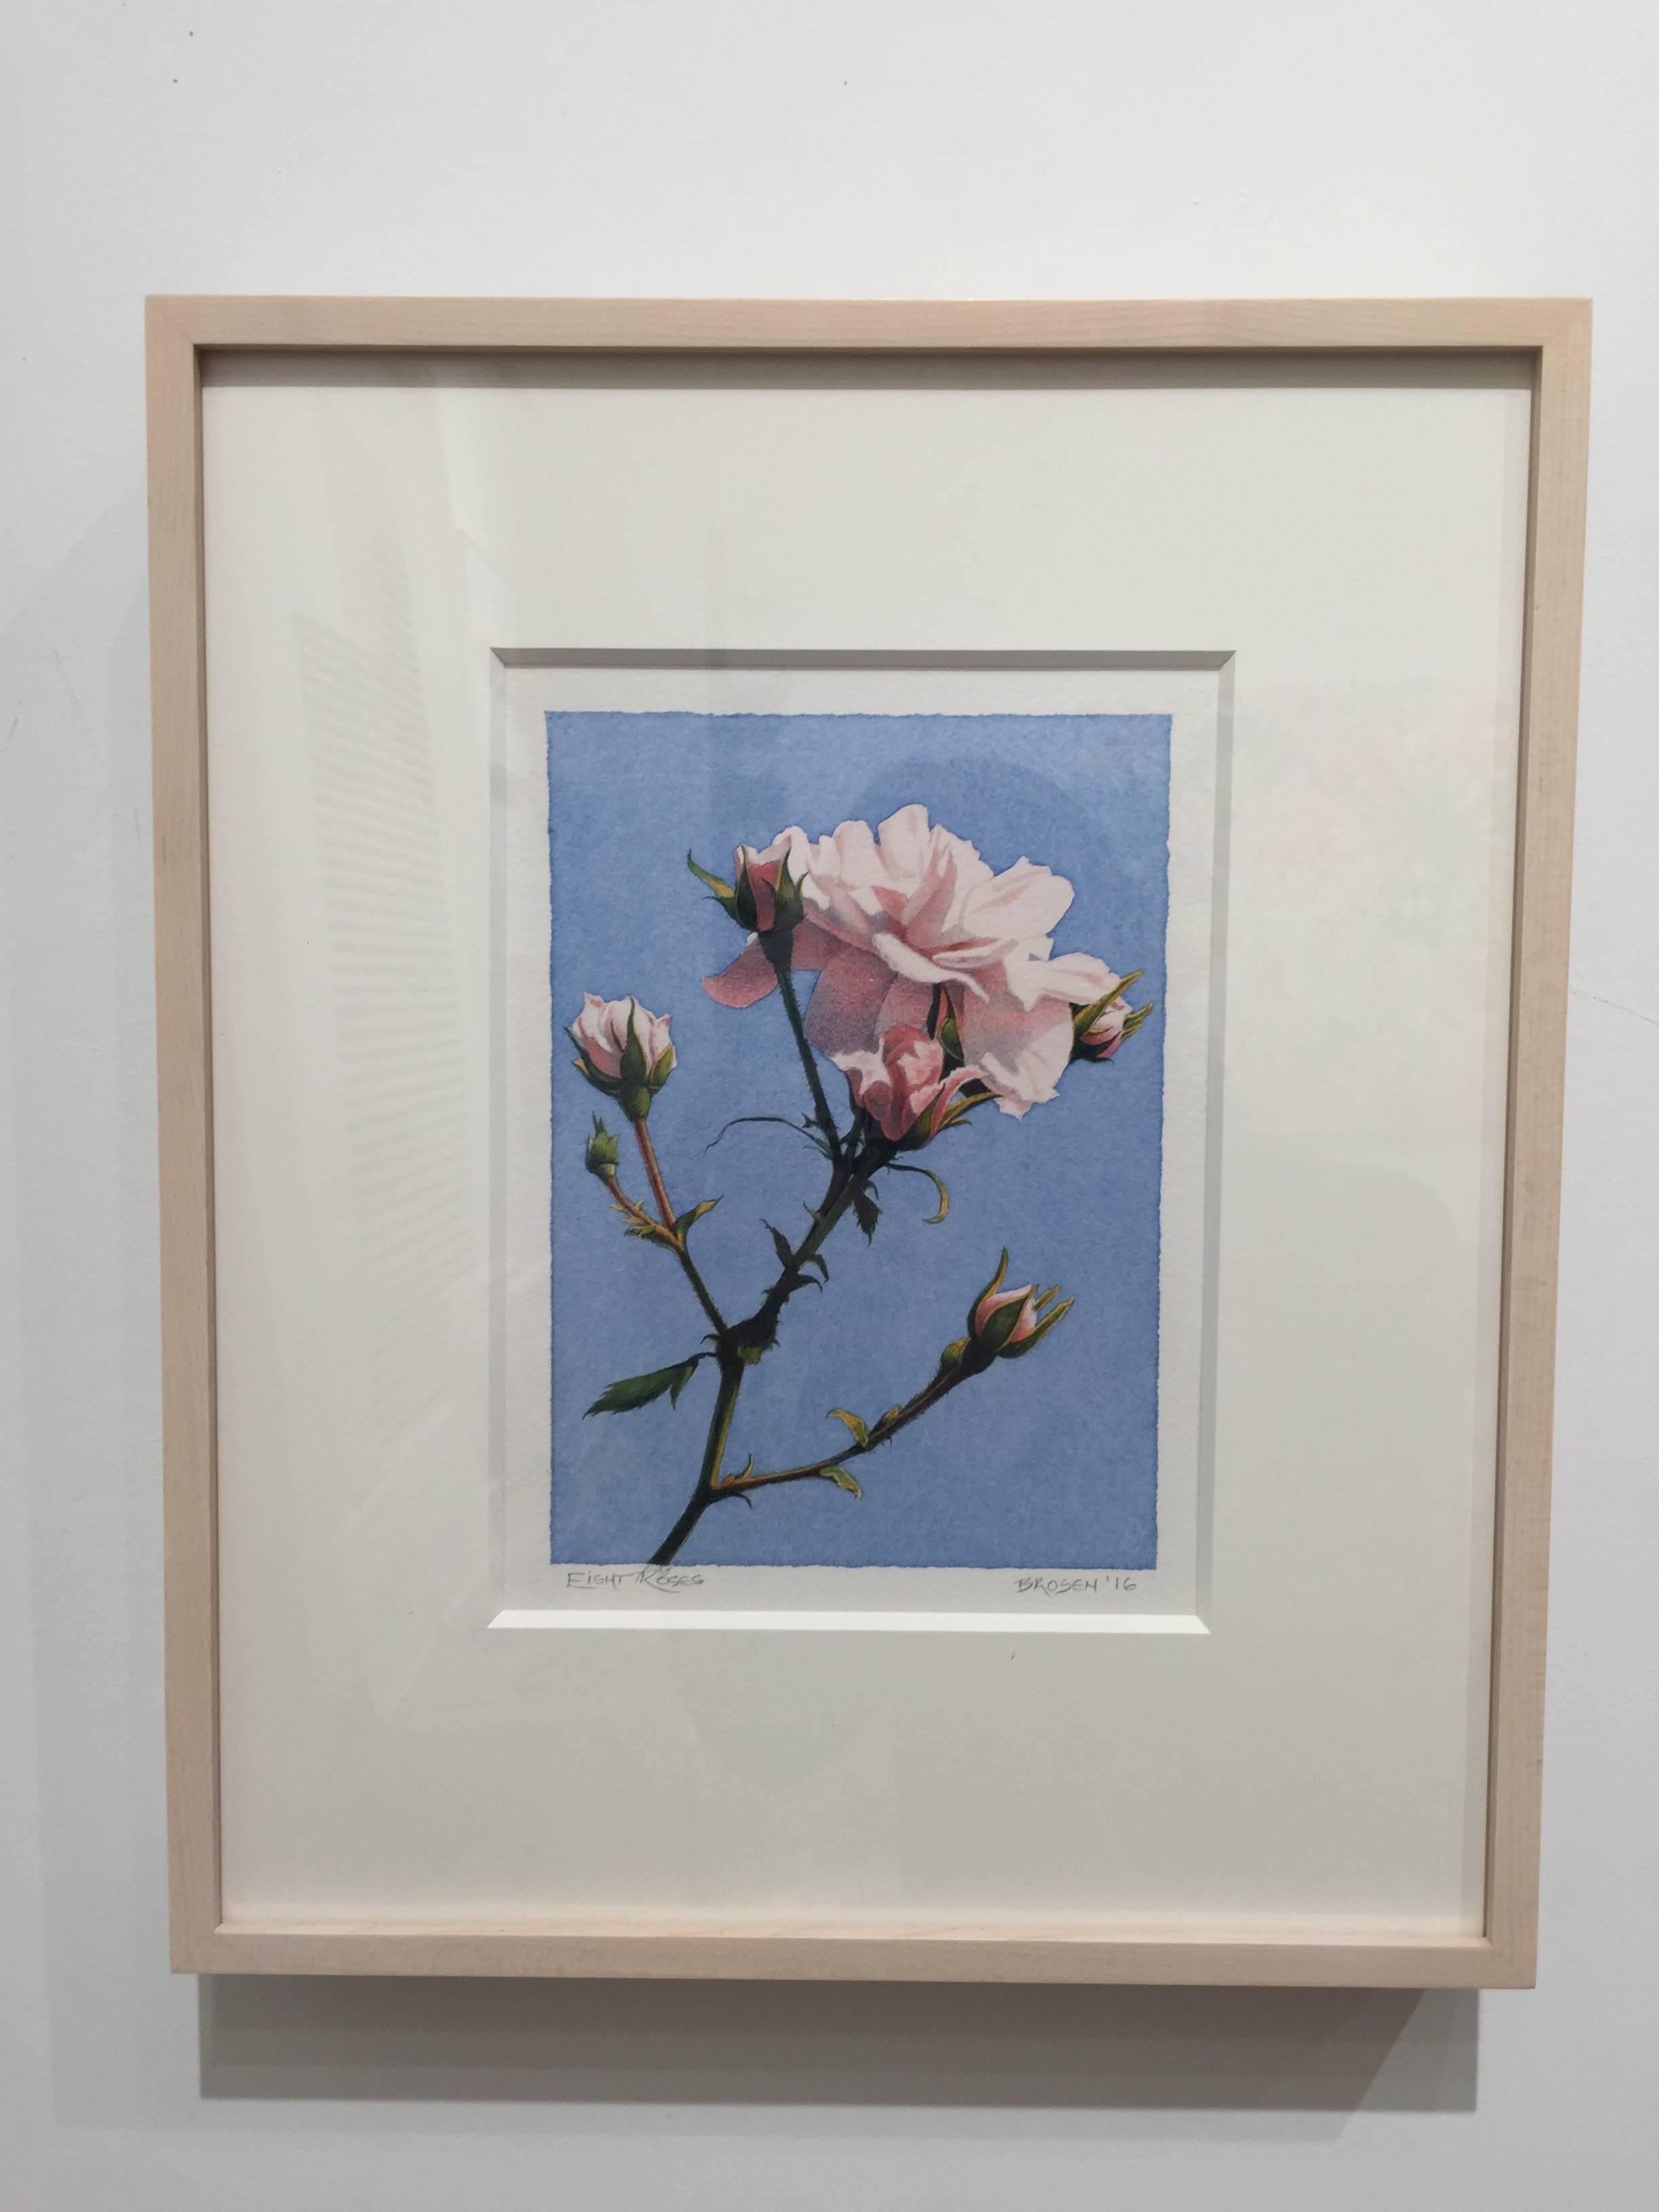 Frederick Brosen, Eight Roses, Realist graphite and watercolor painting, 2016 3